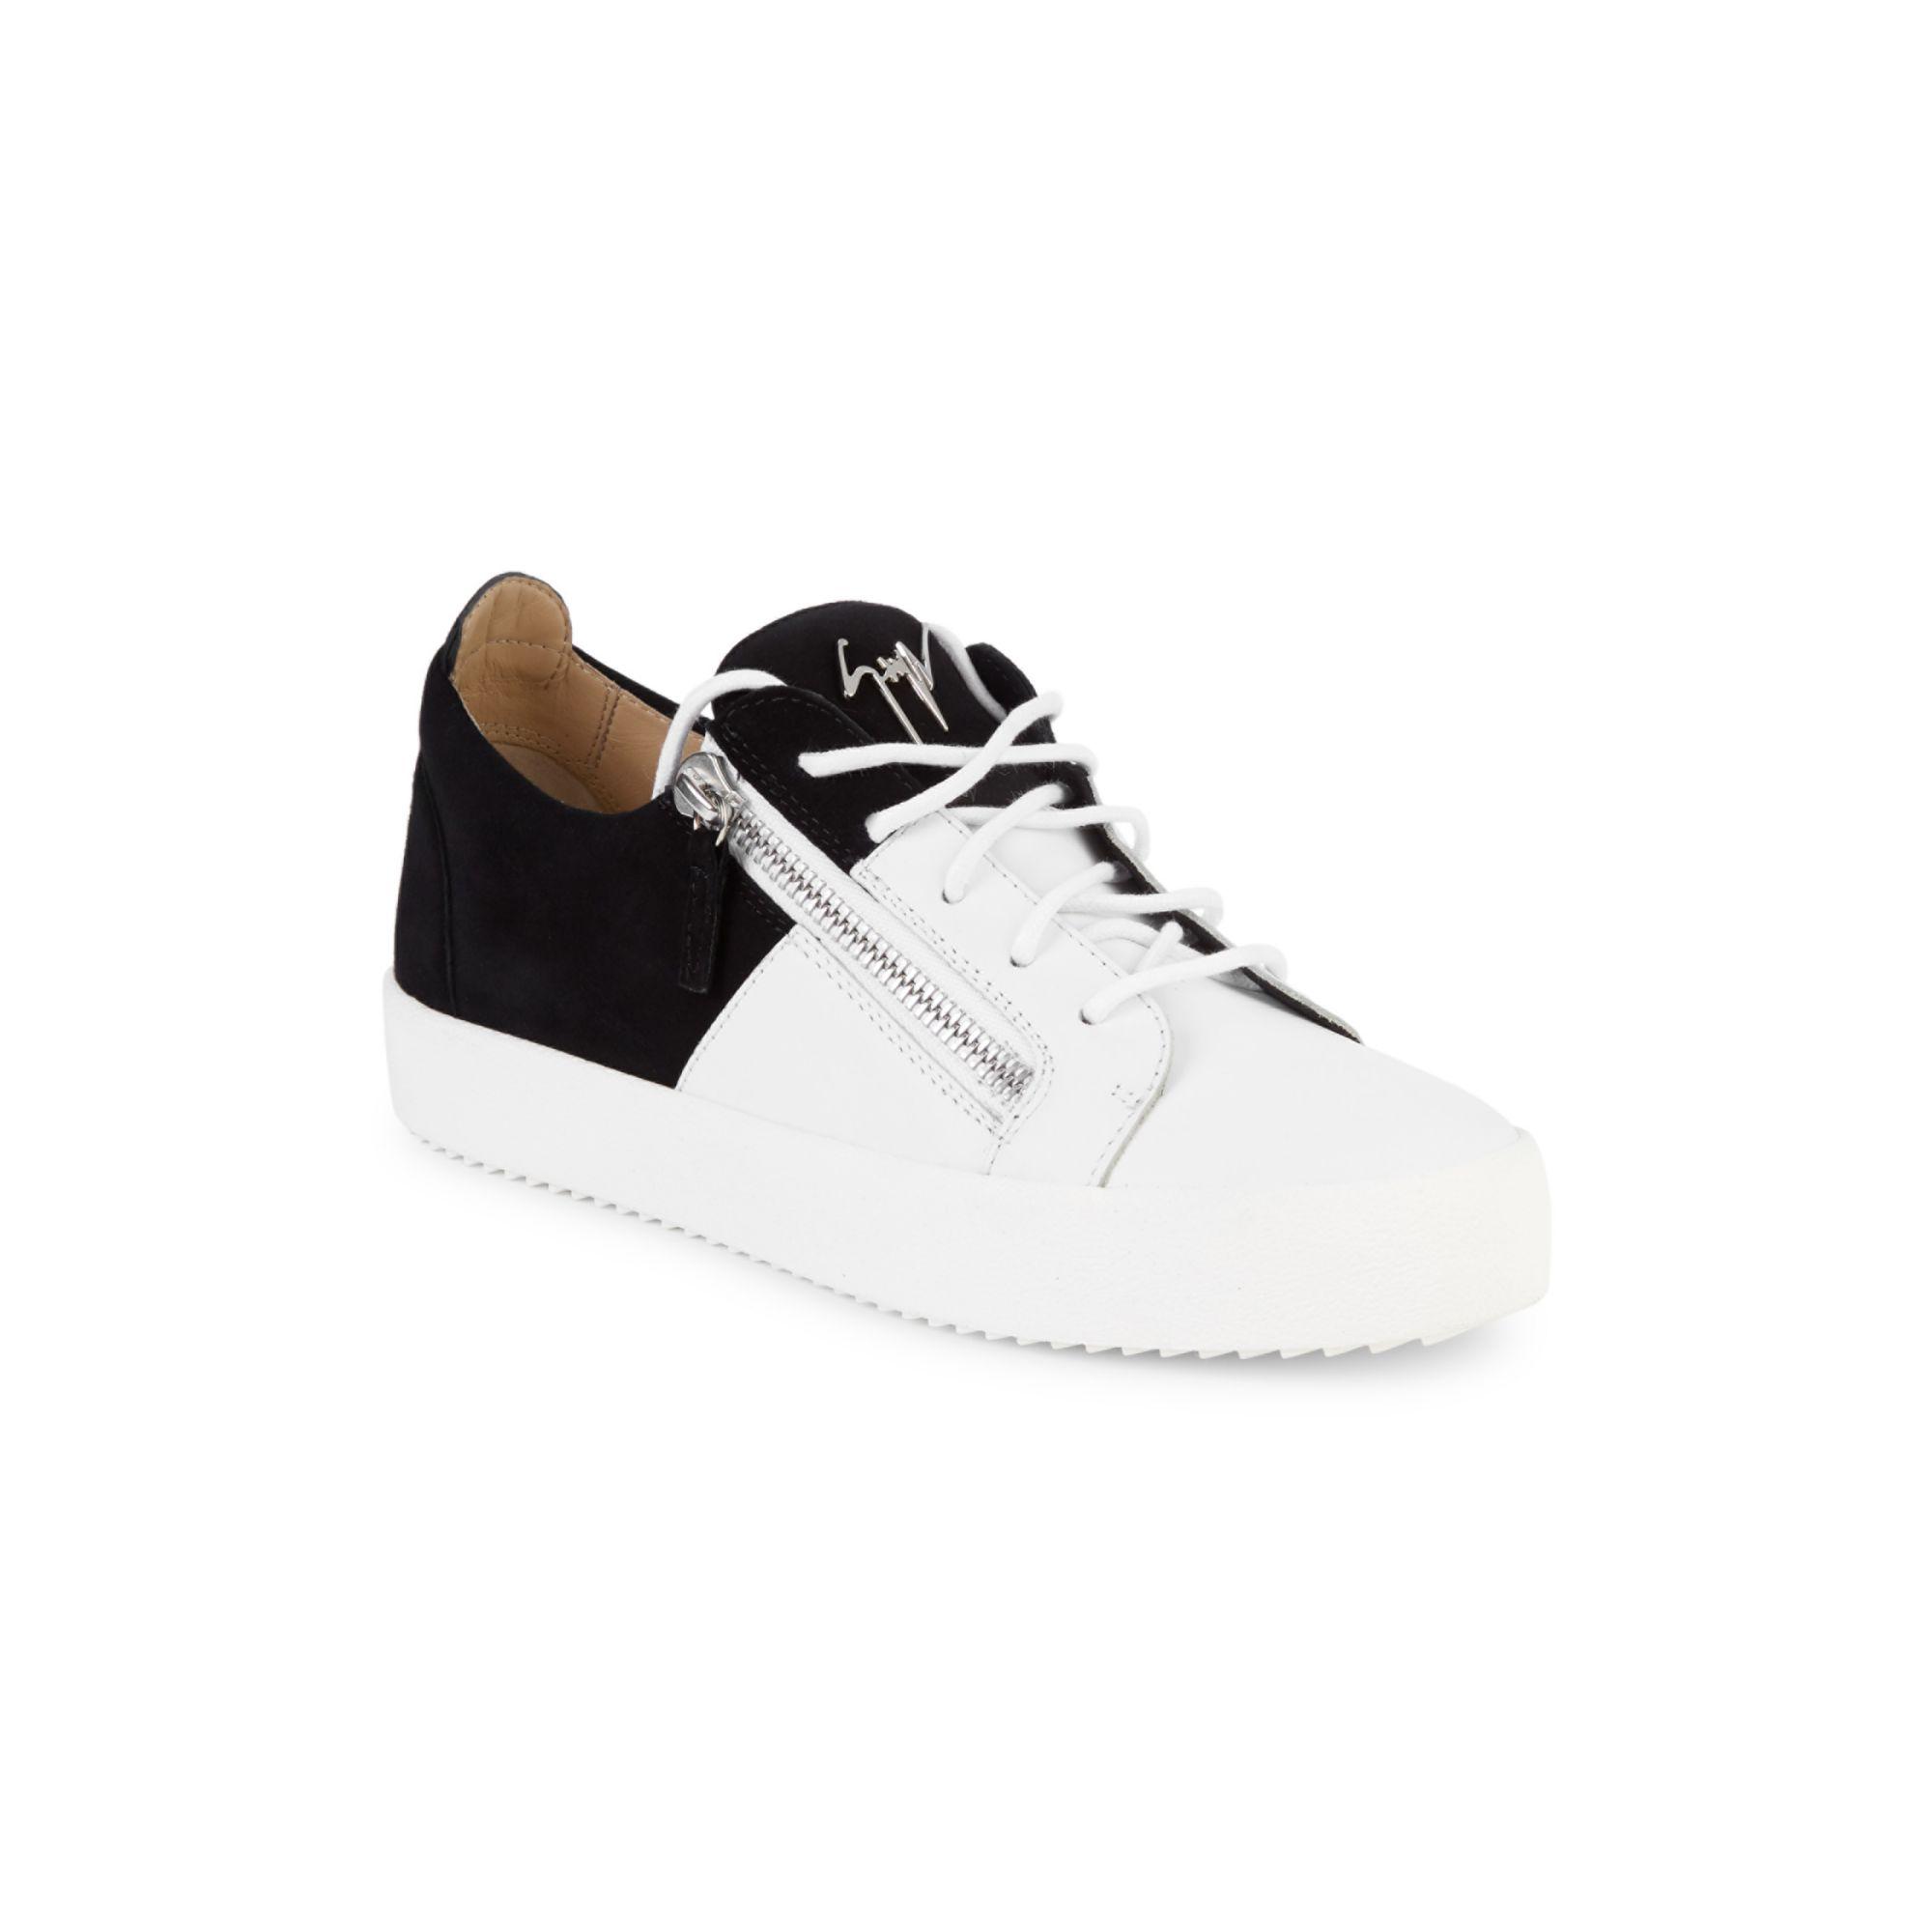 Giuseppe Zanotti Two-tone Suede Sneakers in White for Men - Lyst